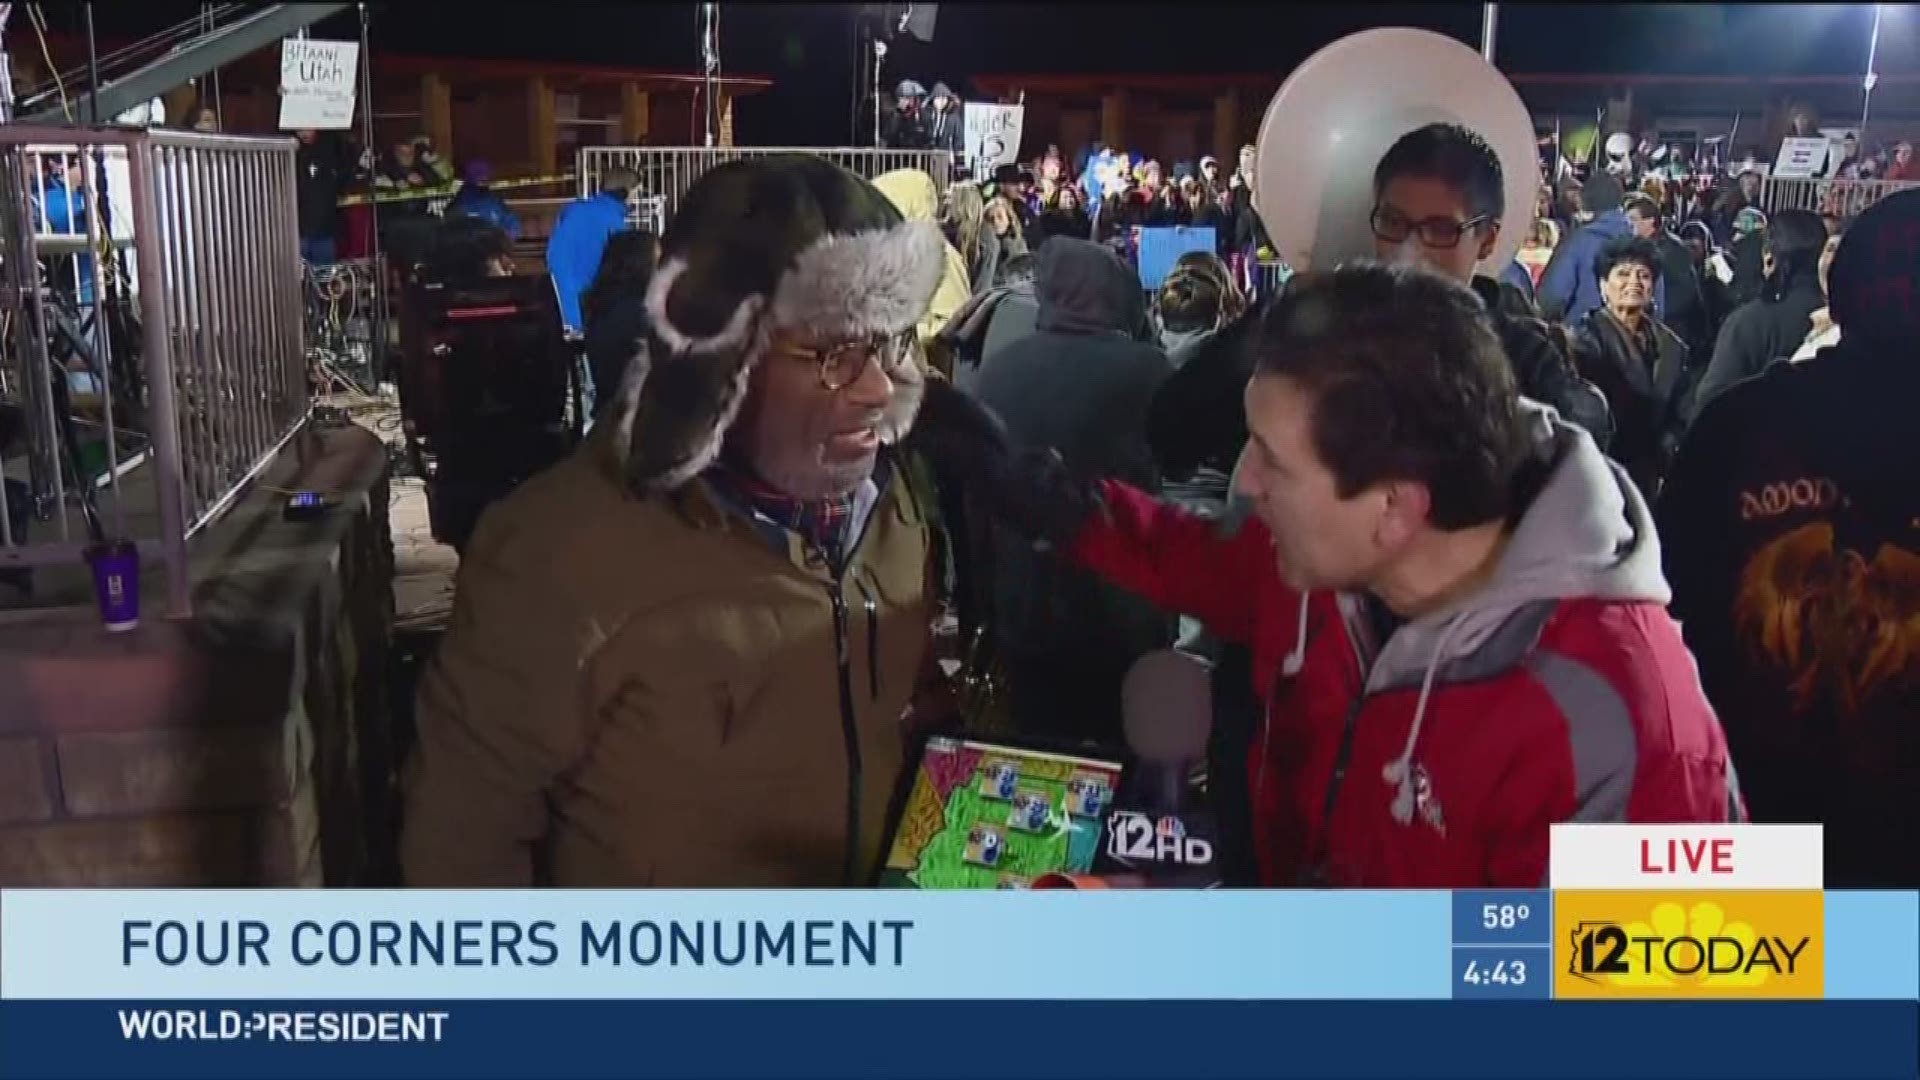 NBC's Al Roker gave the Arizona forecast from the Four Corners Monday as part of his effort to forecast the weather from all 50 states in one week.